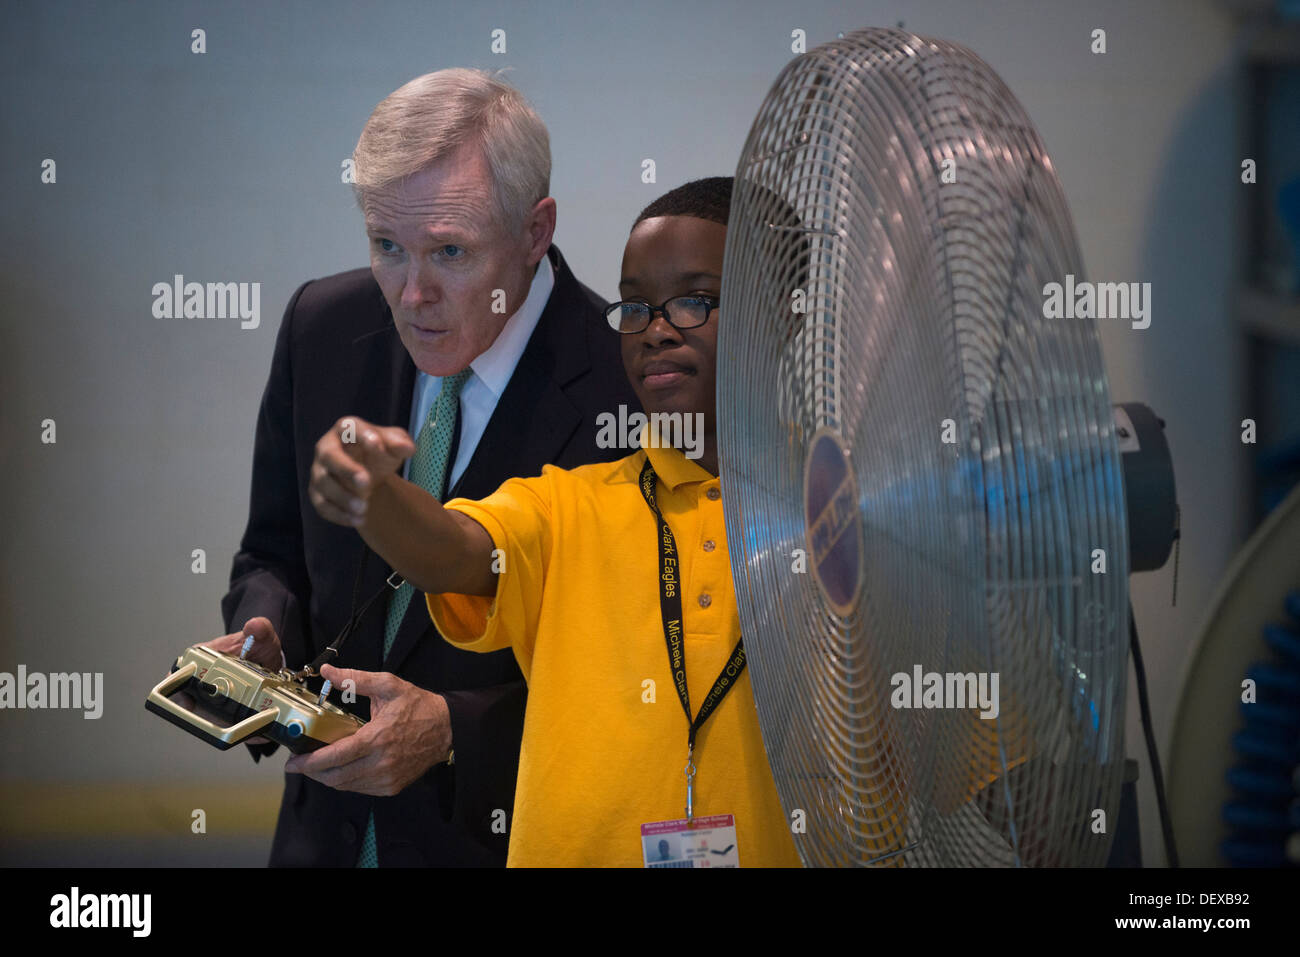 Secretary of the Navy Ray Mabus operates a remote-controled boat during a Science, Technology, Engineering and Mathematics (STEM) event at Michele Clark High School. During the visit to the school, Mabus and Emanuel also took part in a round table discuss Stock Photo